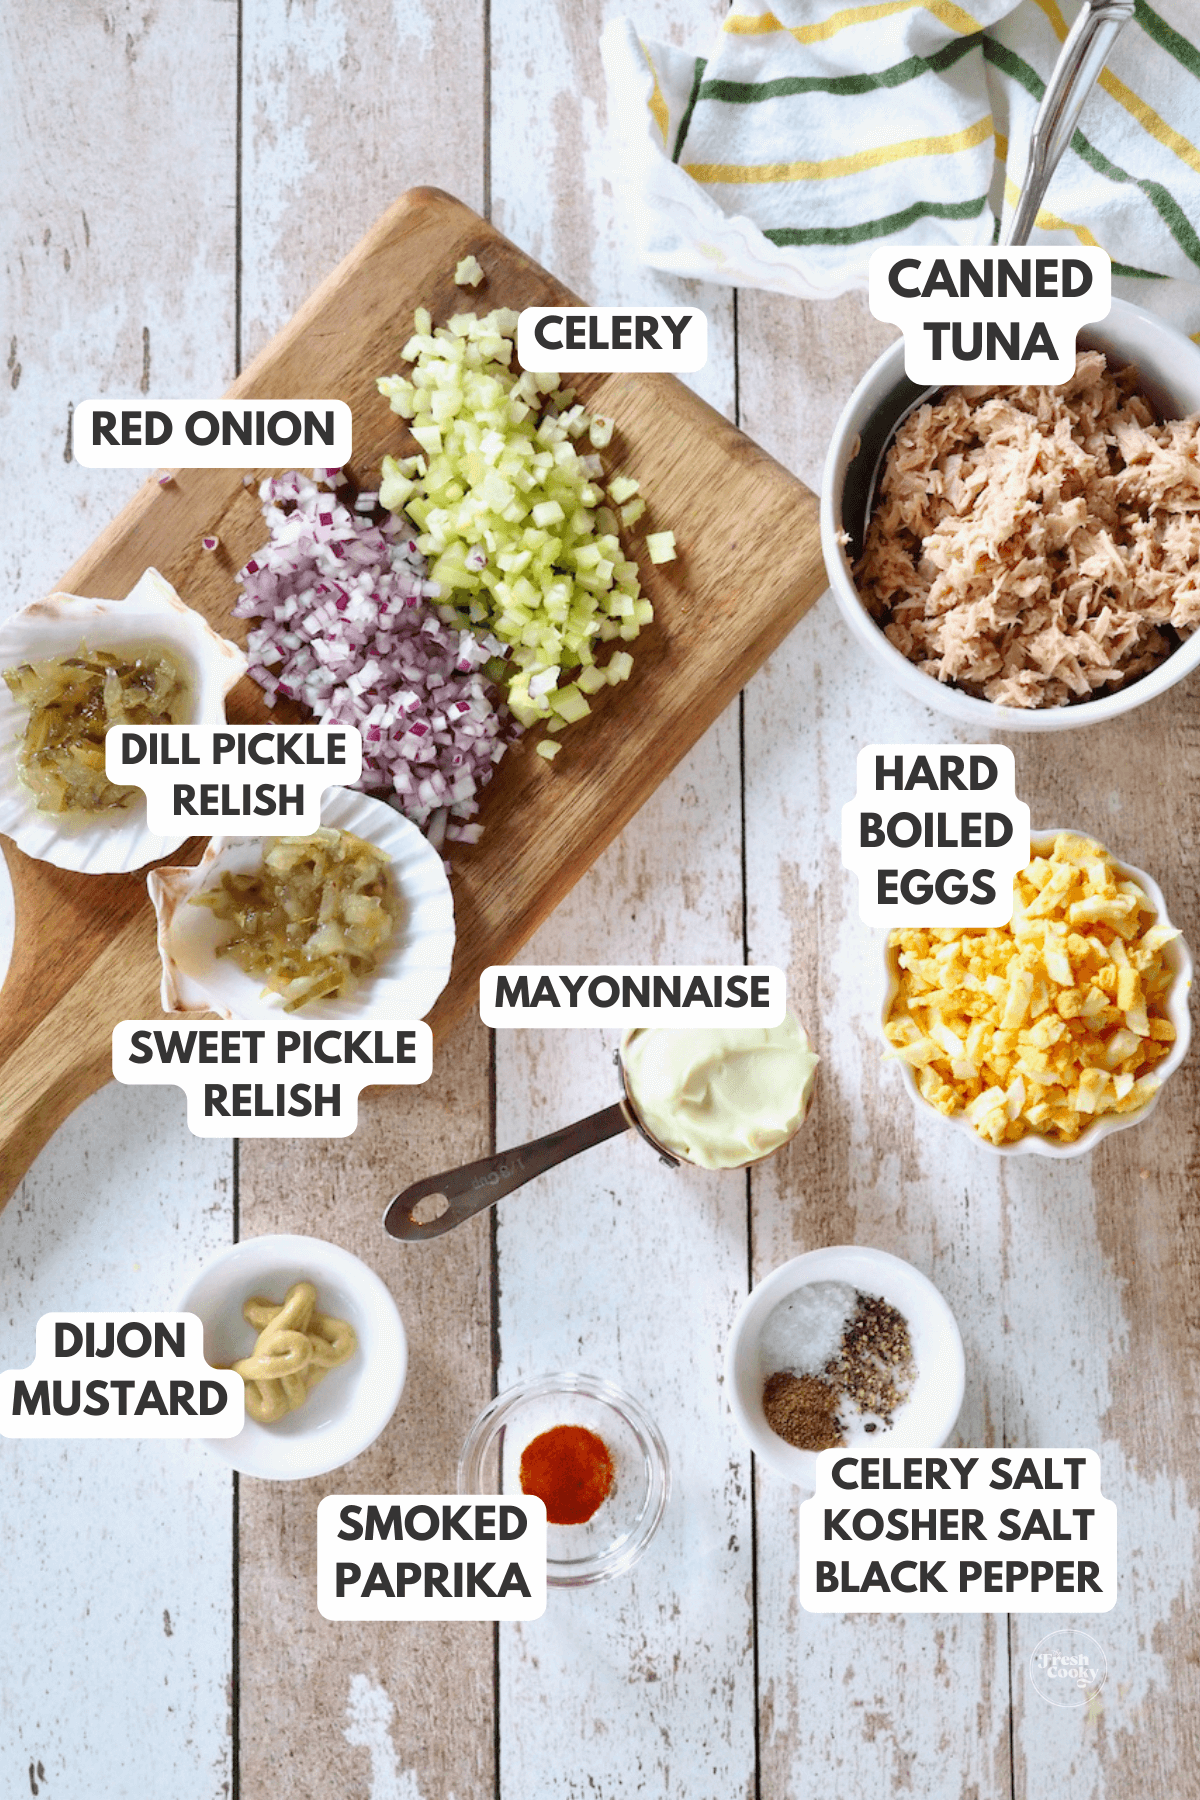 Labeled ingredients for southern tuna salad recipe.